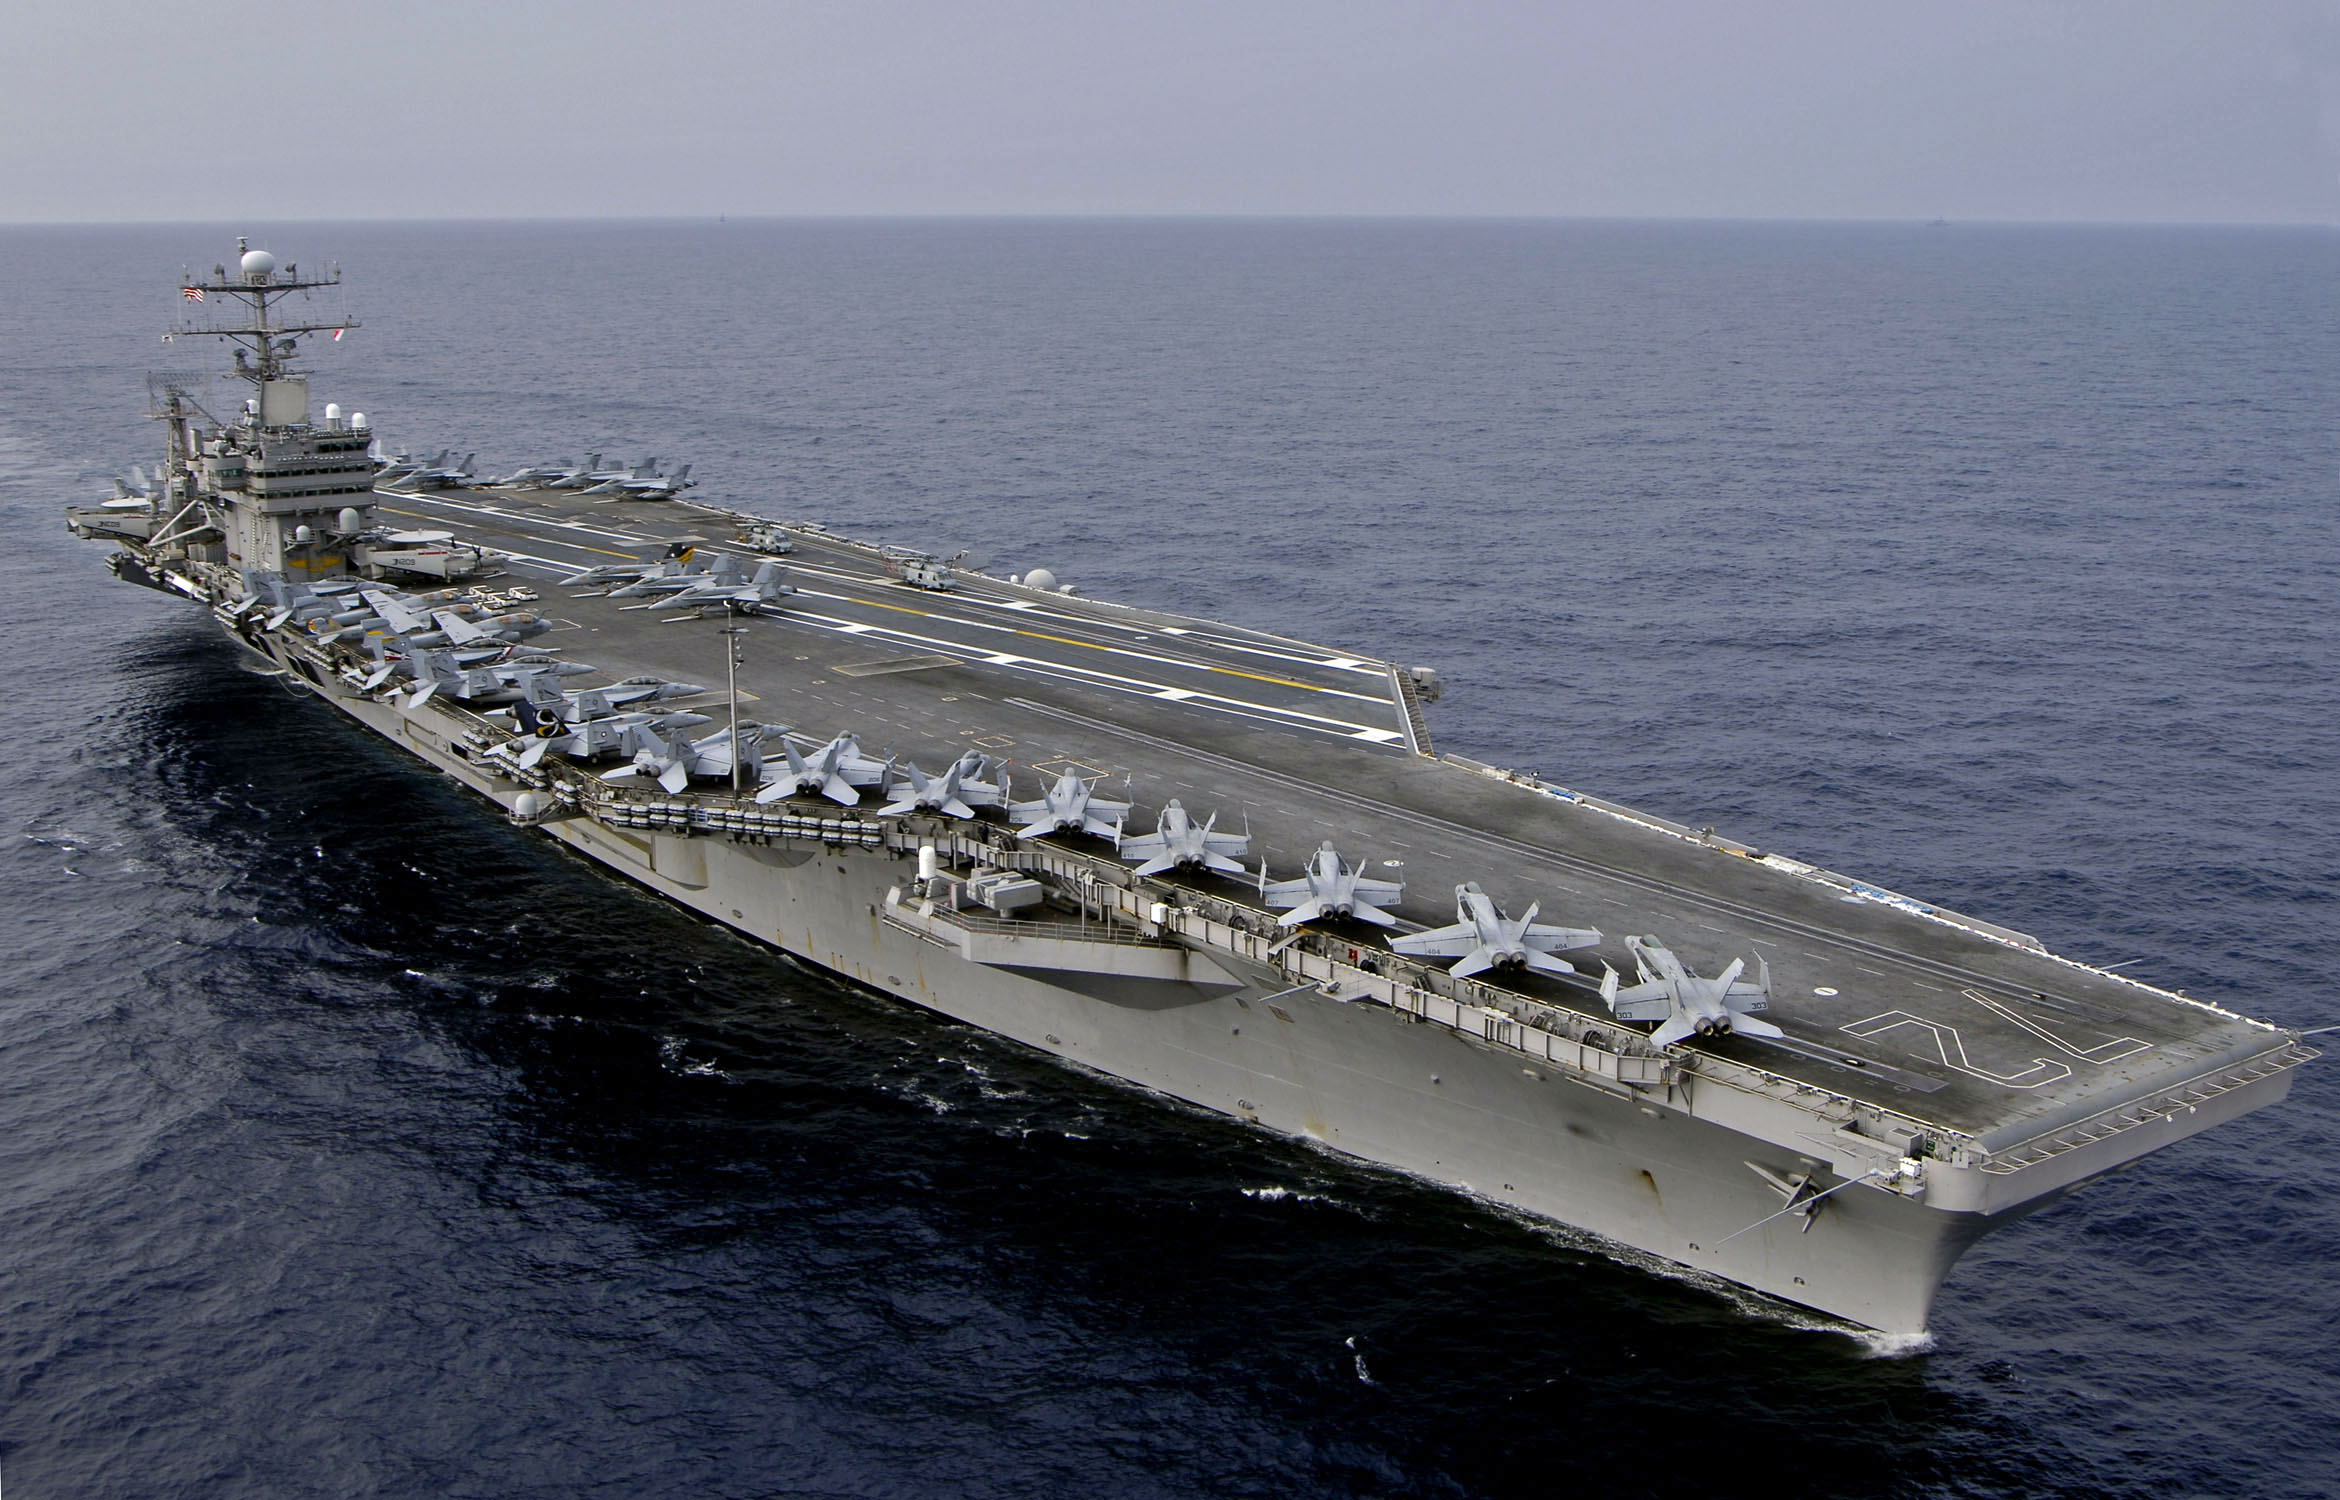 US Navy 060323-N-6074Y-177 The Nimitz-class aircraft carrier USS Abraham Lincoln (CVN-72), and ships of the Japanese Maritime Self-Defense Force (JMSDF) conduct a PASSEX in the Western Pacific